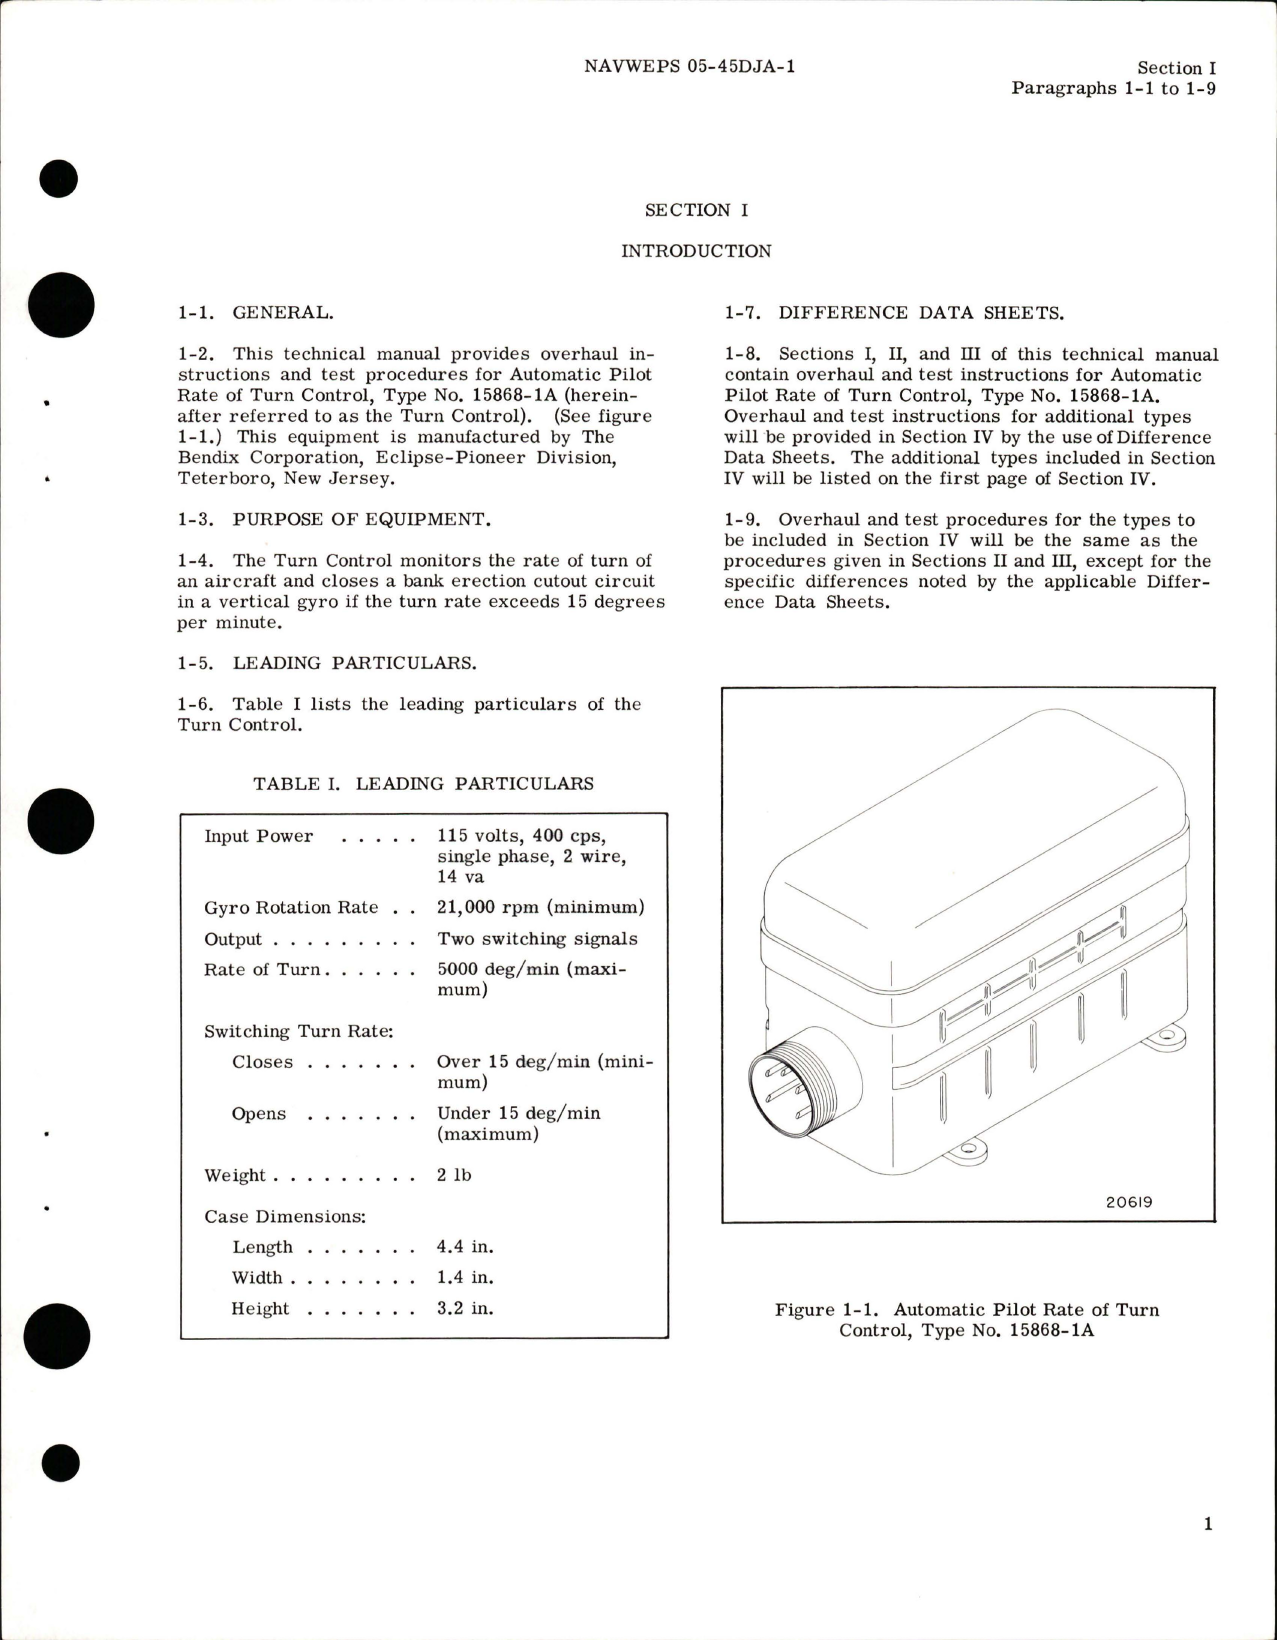 Sample page 5 from AirCorps Library document: Overhaul Instructions for Automatic Pilot Rate of Turn Control - Type 15868-1A